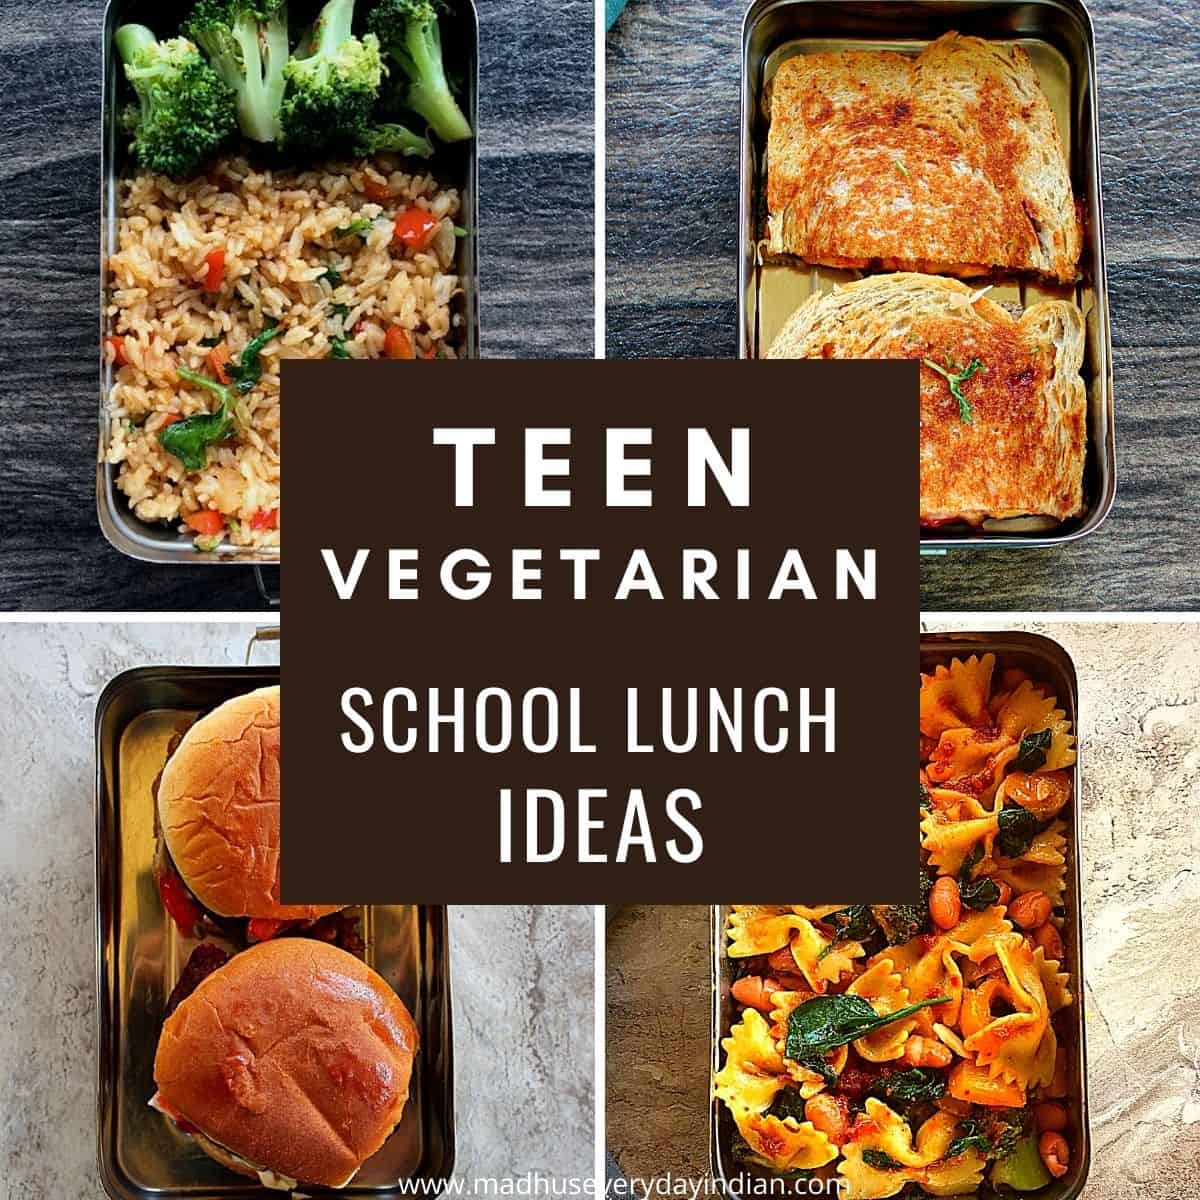 Vegetarian School lunch ideas for Teens - Madhu's Everyday Indian